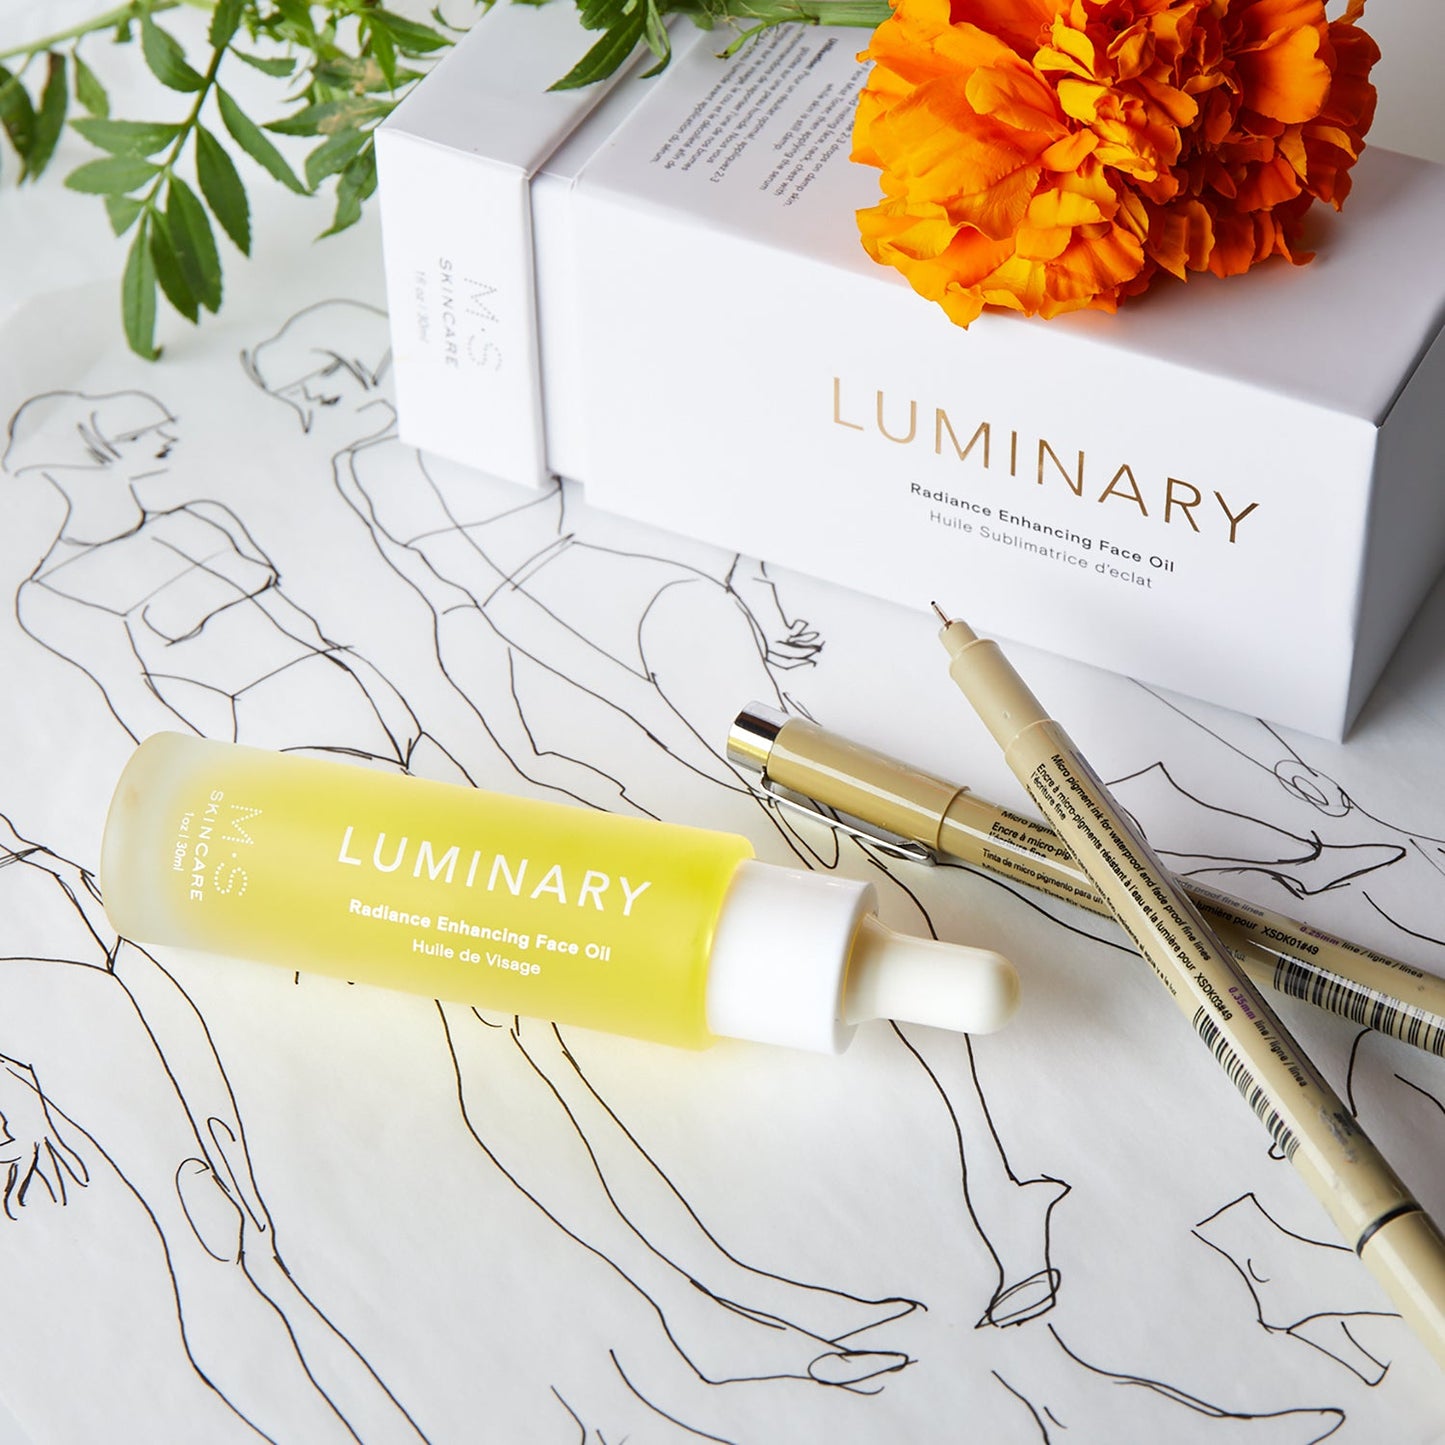 LUMINARY | Radiance Enhancing Face Oil by Mullein and Sparrow